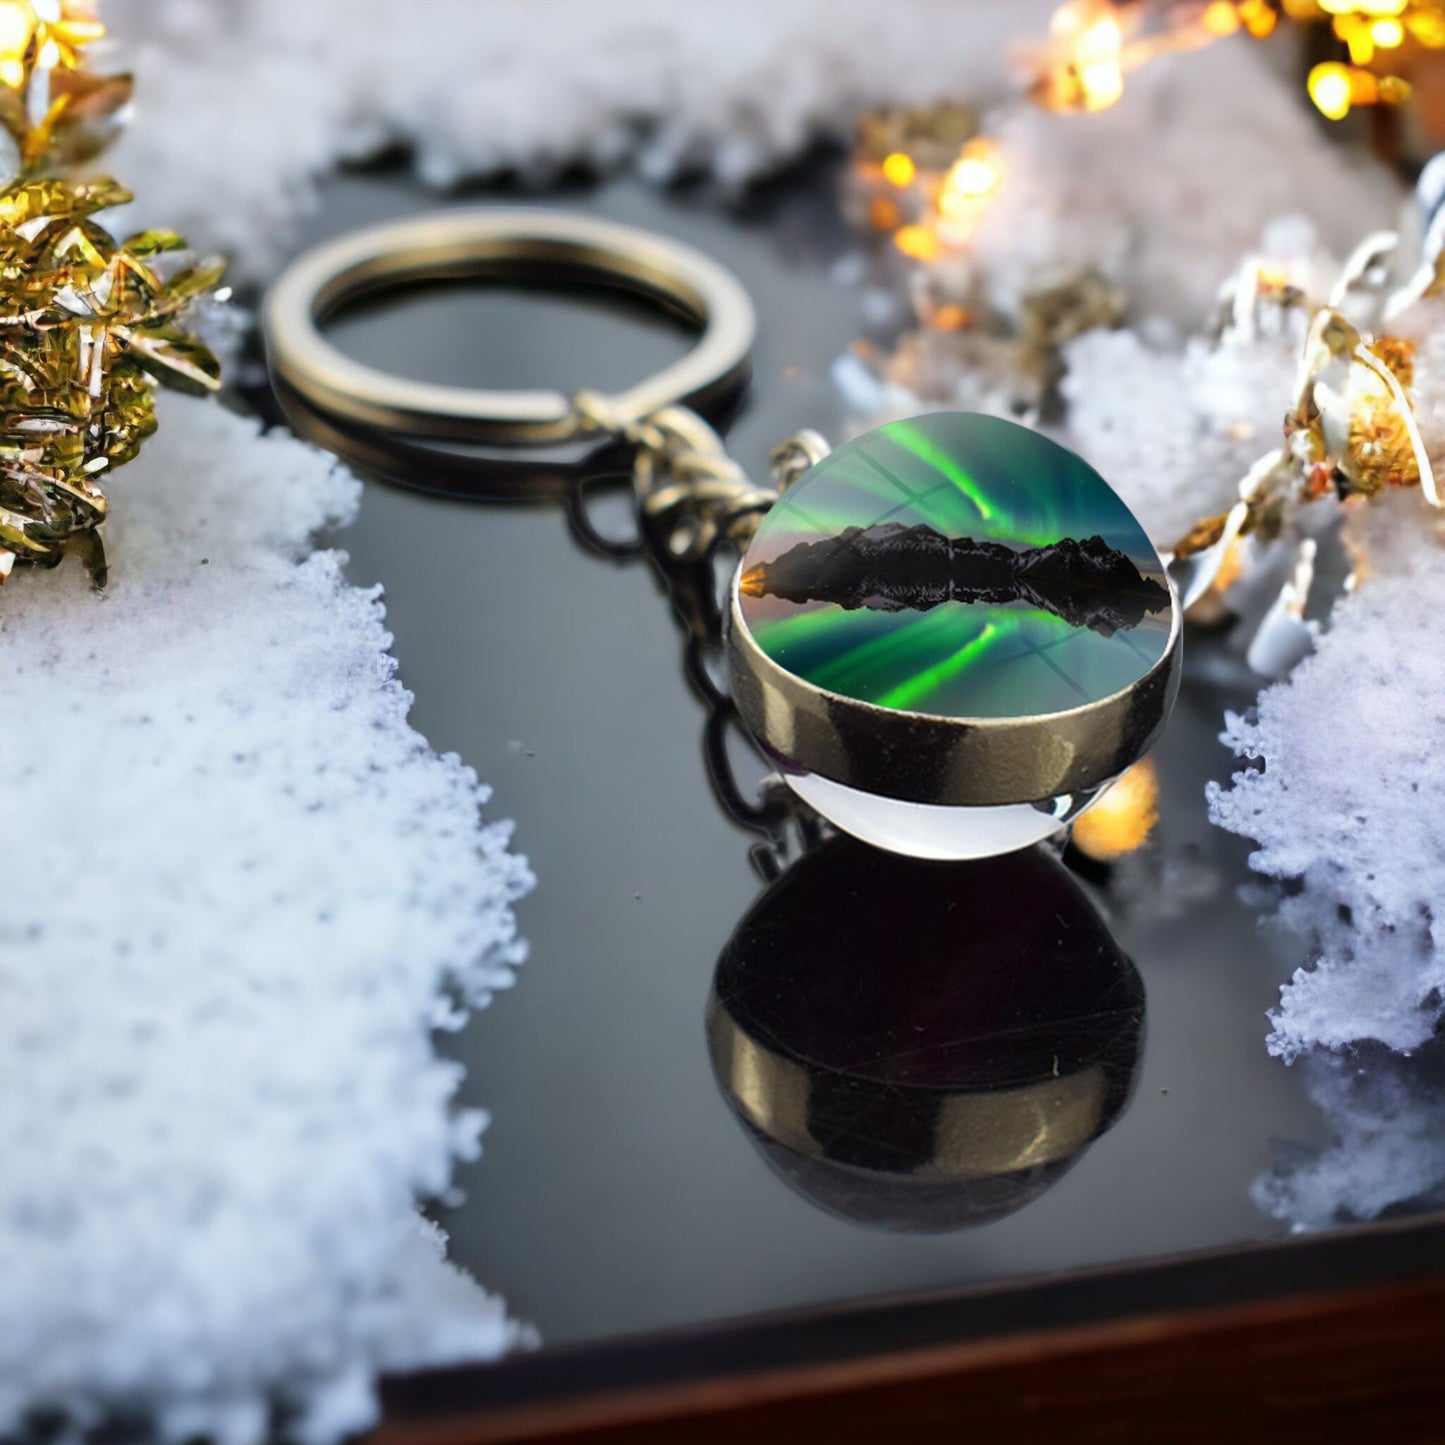 Unique Aurora Borealis Keyring - Northern Light Jewelry - Double Side Glass Ball Key Chain - Perfect Aurora Lovers Gift 24